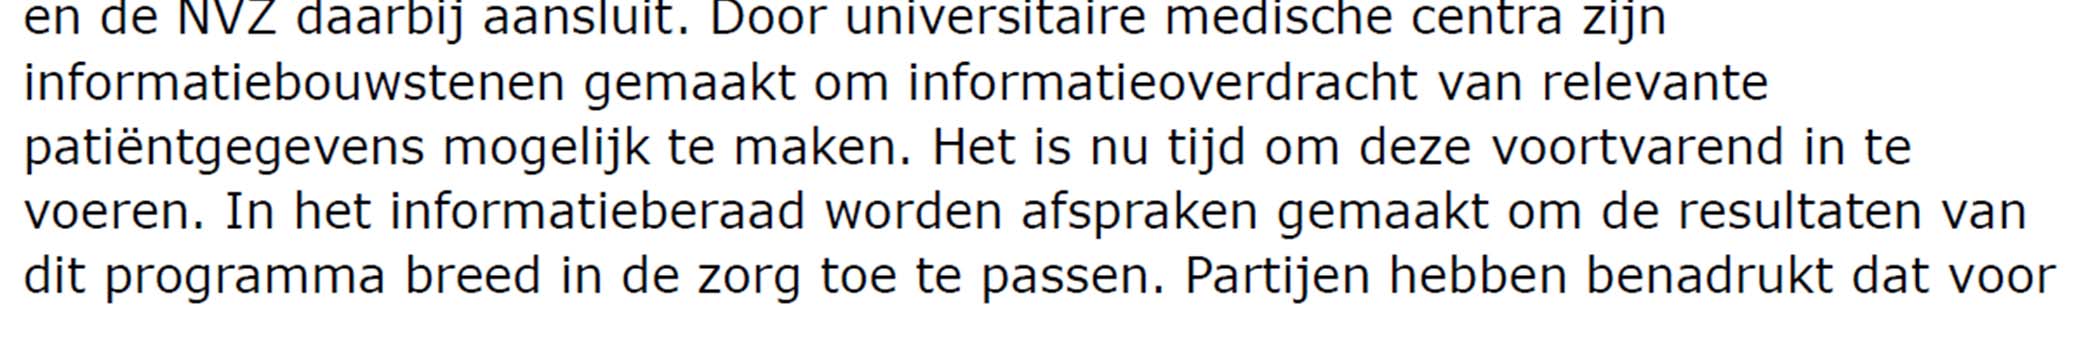 Brief minister Schippers, VWS uit